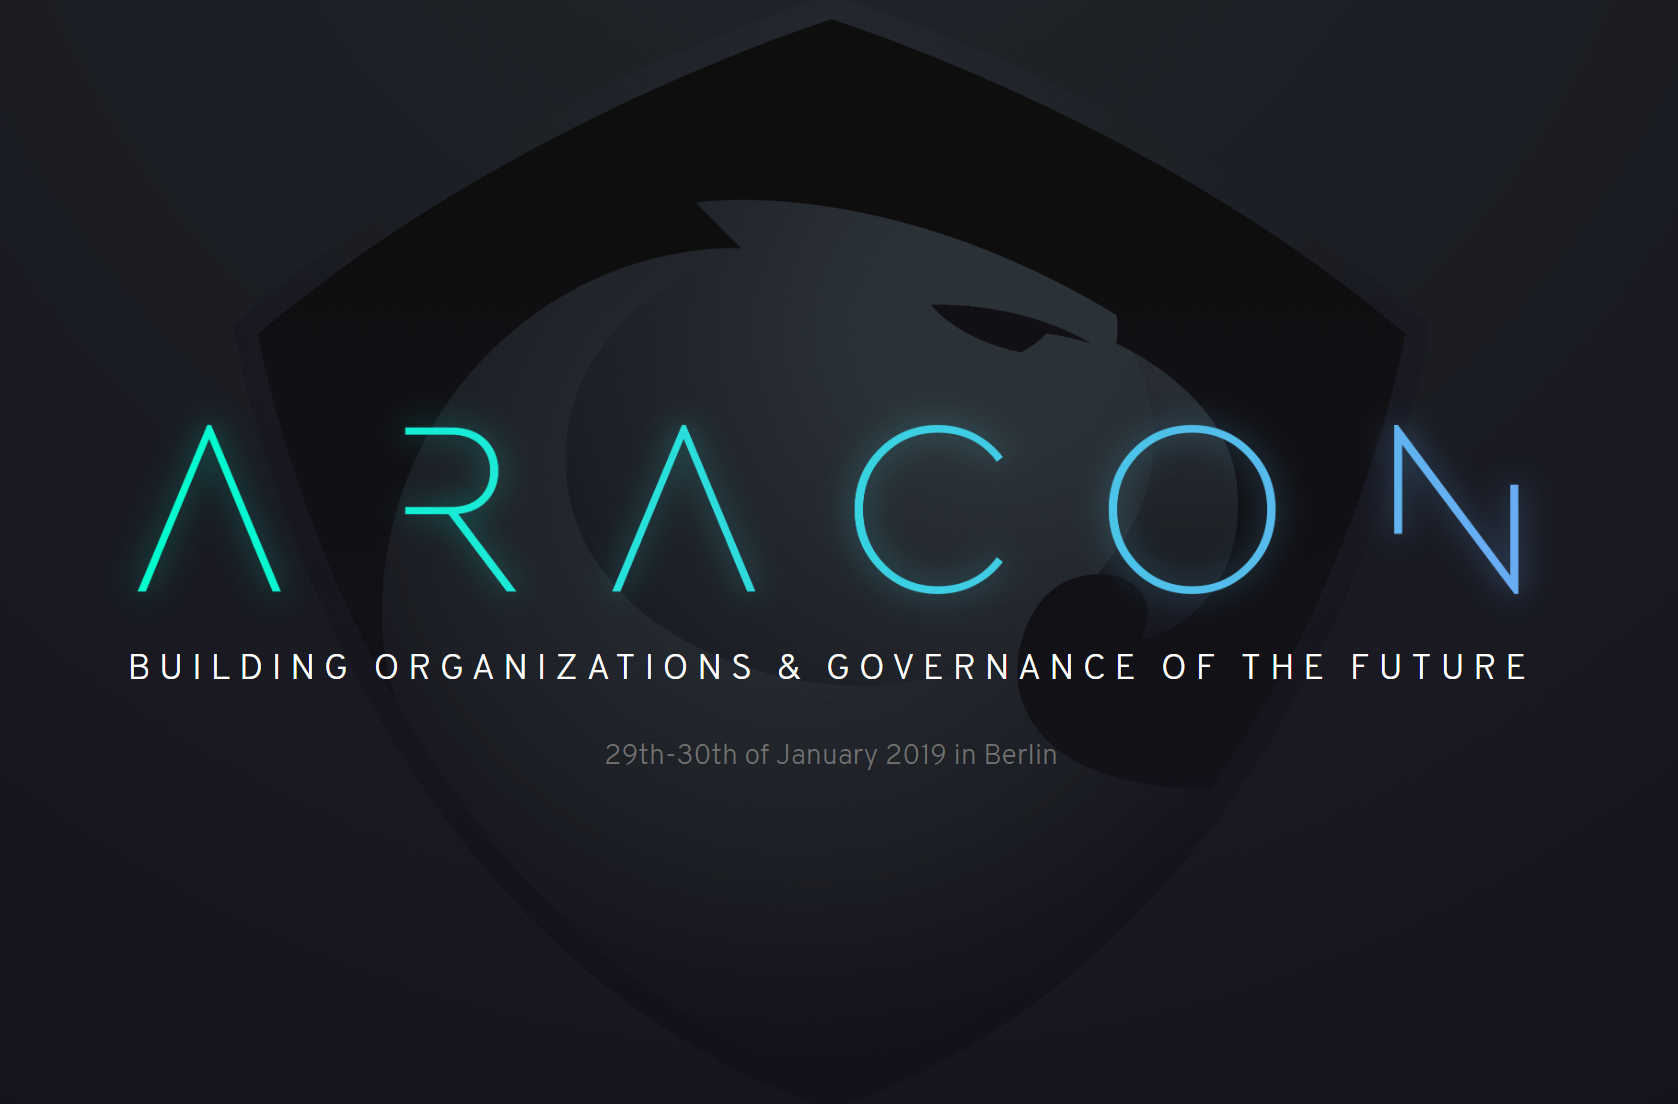 Aracon Conference To Be Held in Berlin, Germany